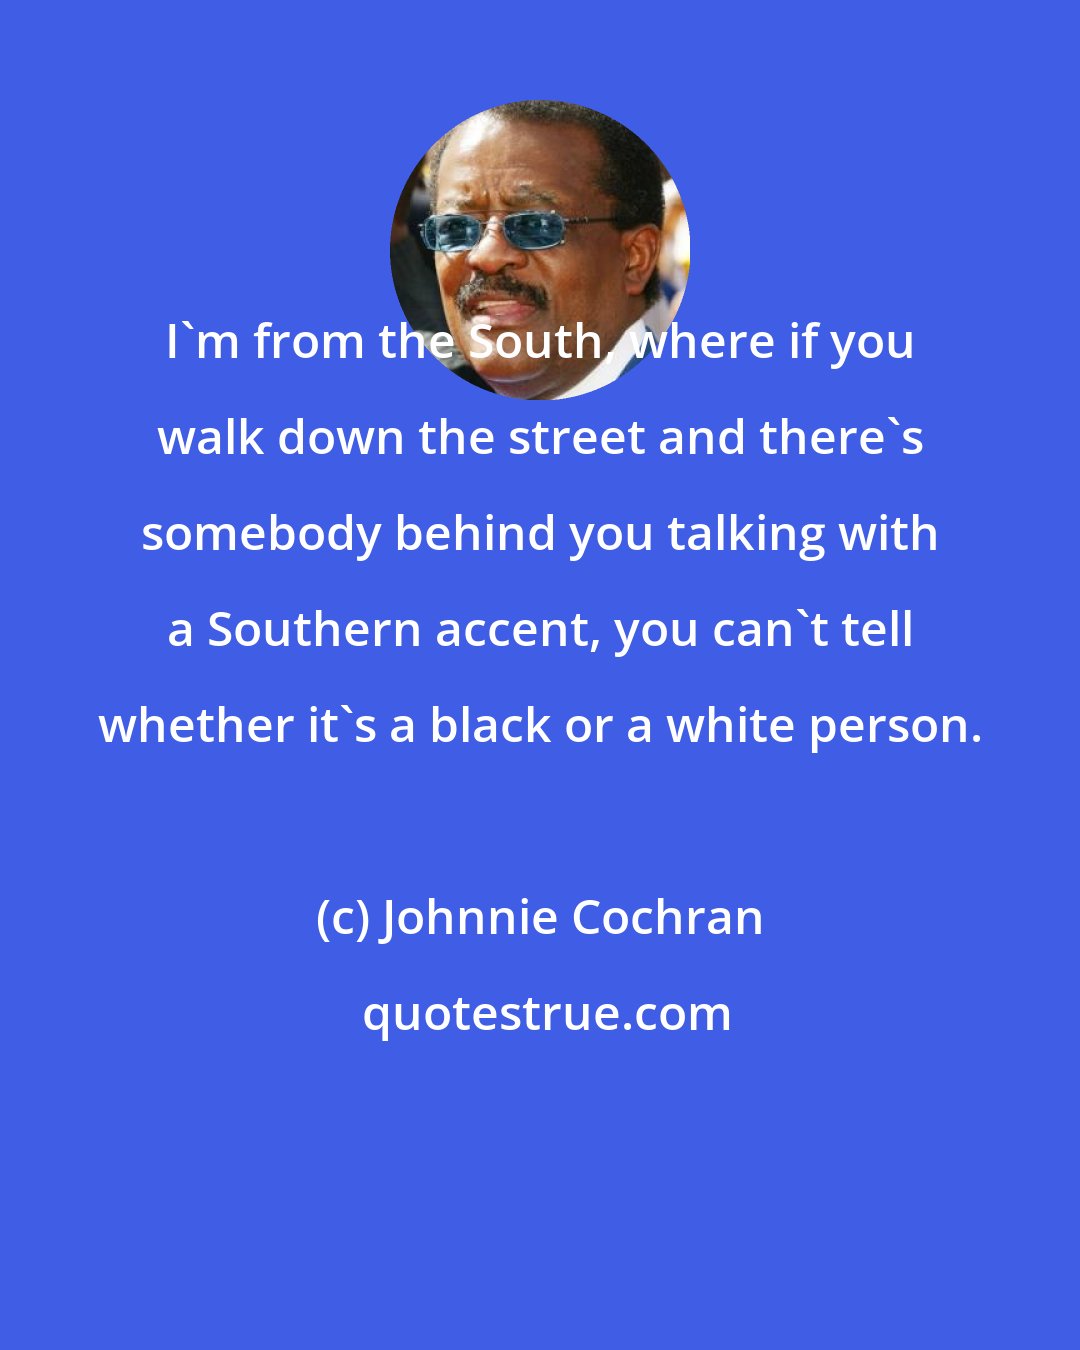 Johnnie Cochran: I'm from the South, where if you walk down the street and there's somebody behind you talking with a Southern accent, you can't tell whether it's a black or a white person.